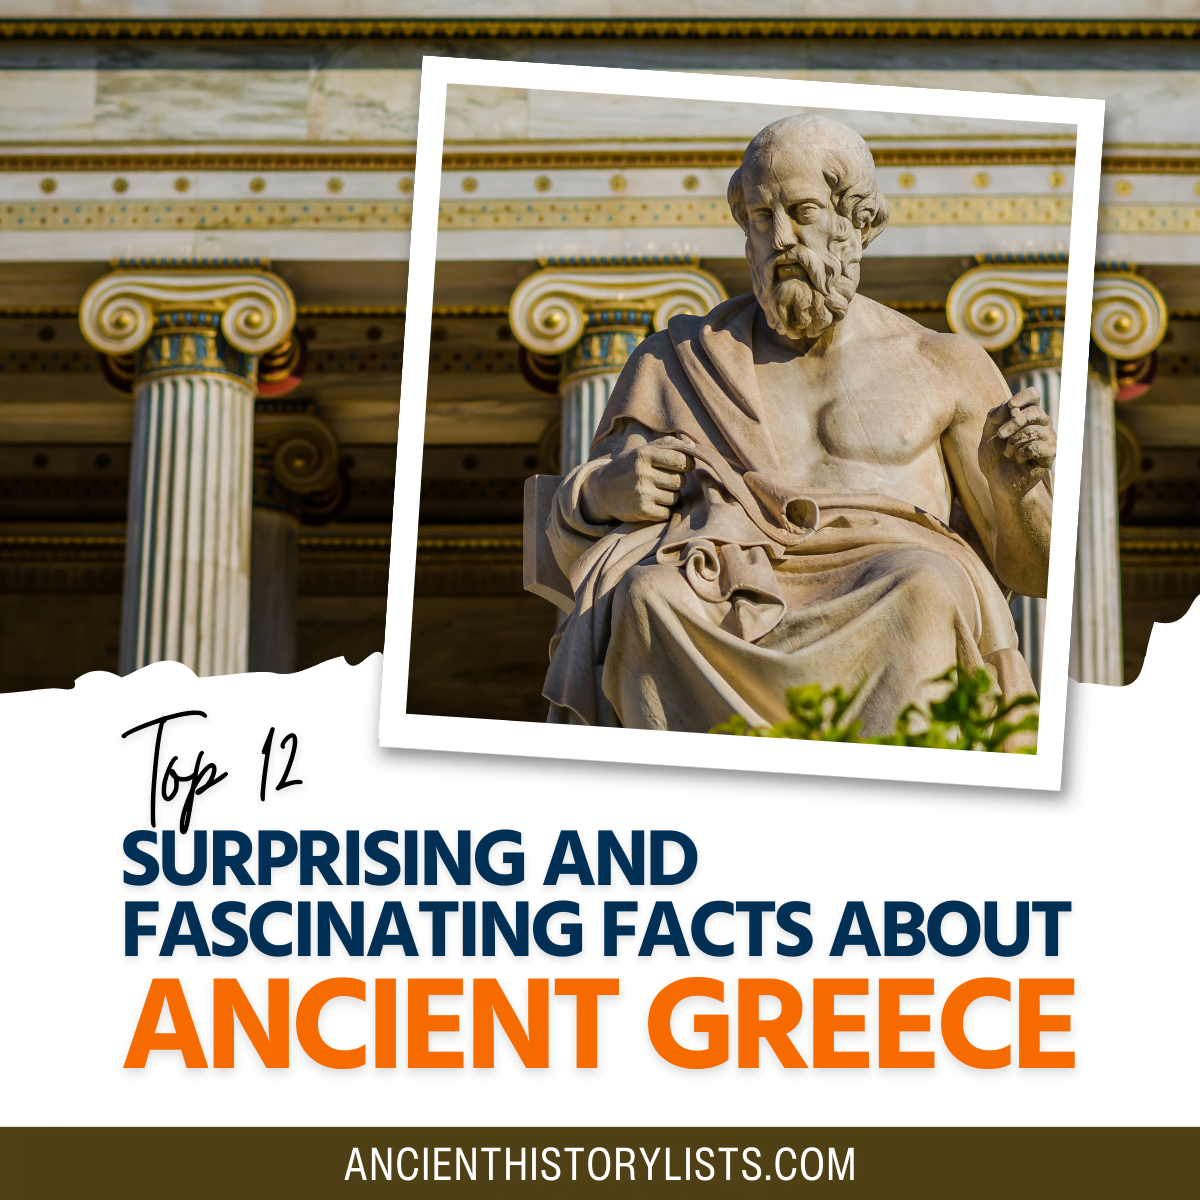 Fascinating Facts about Ancient Greece